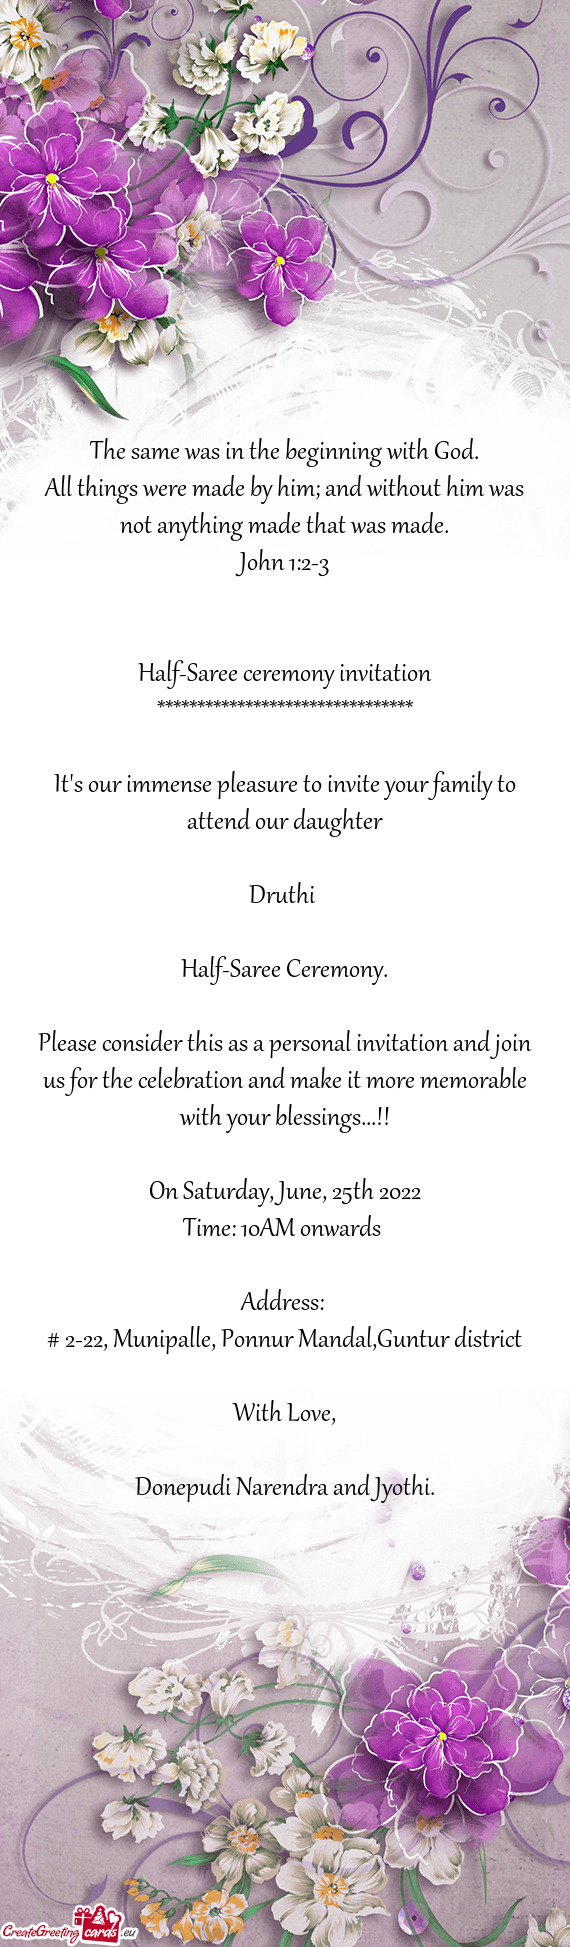 Please consider this as a personal invitation and join us for the celebration and make it more memor